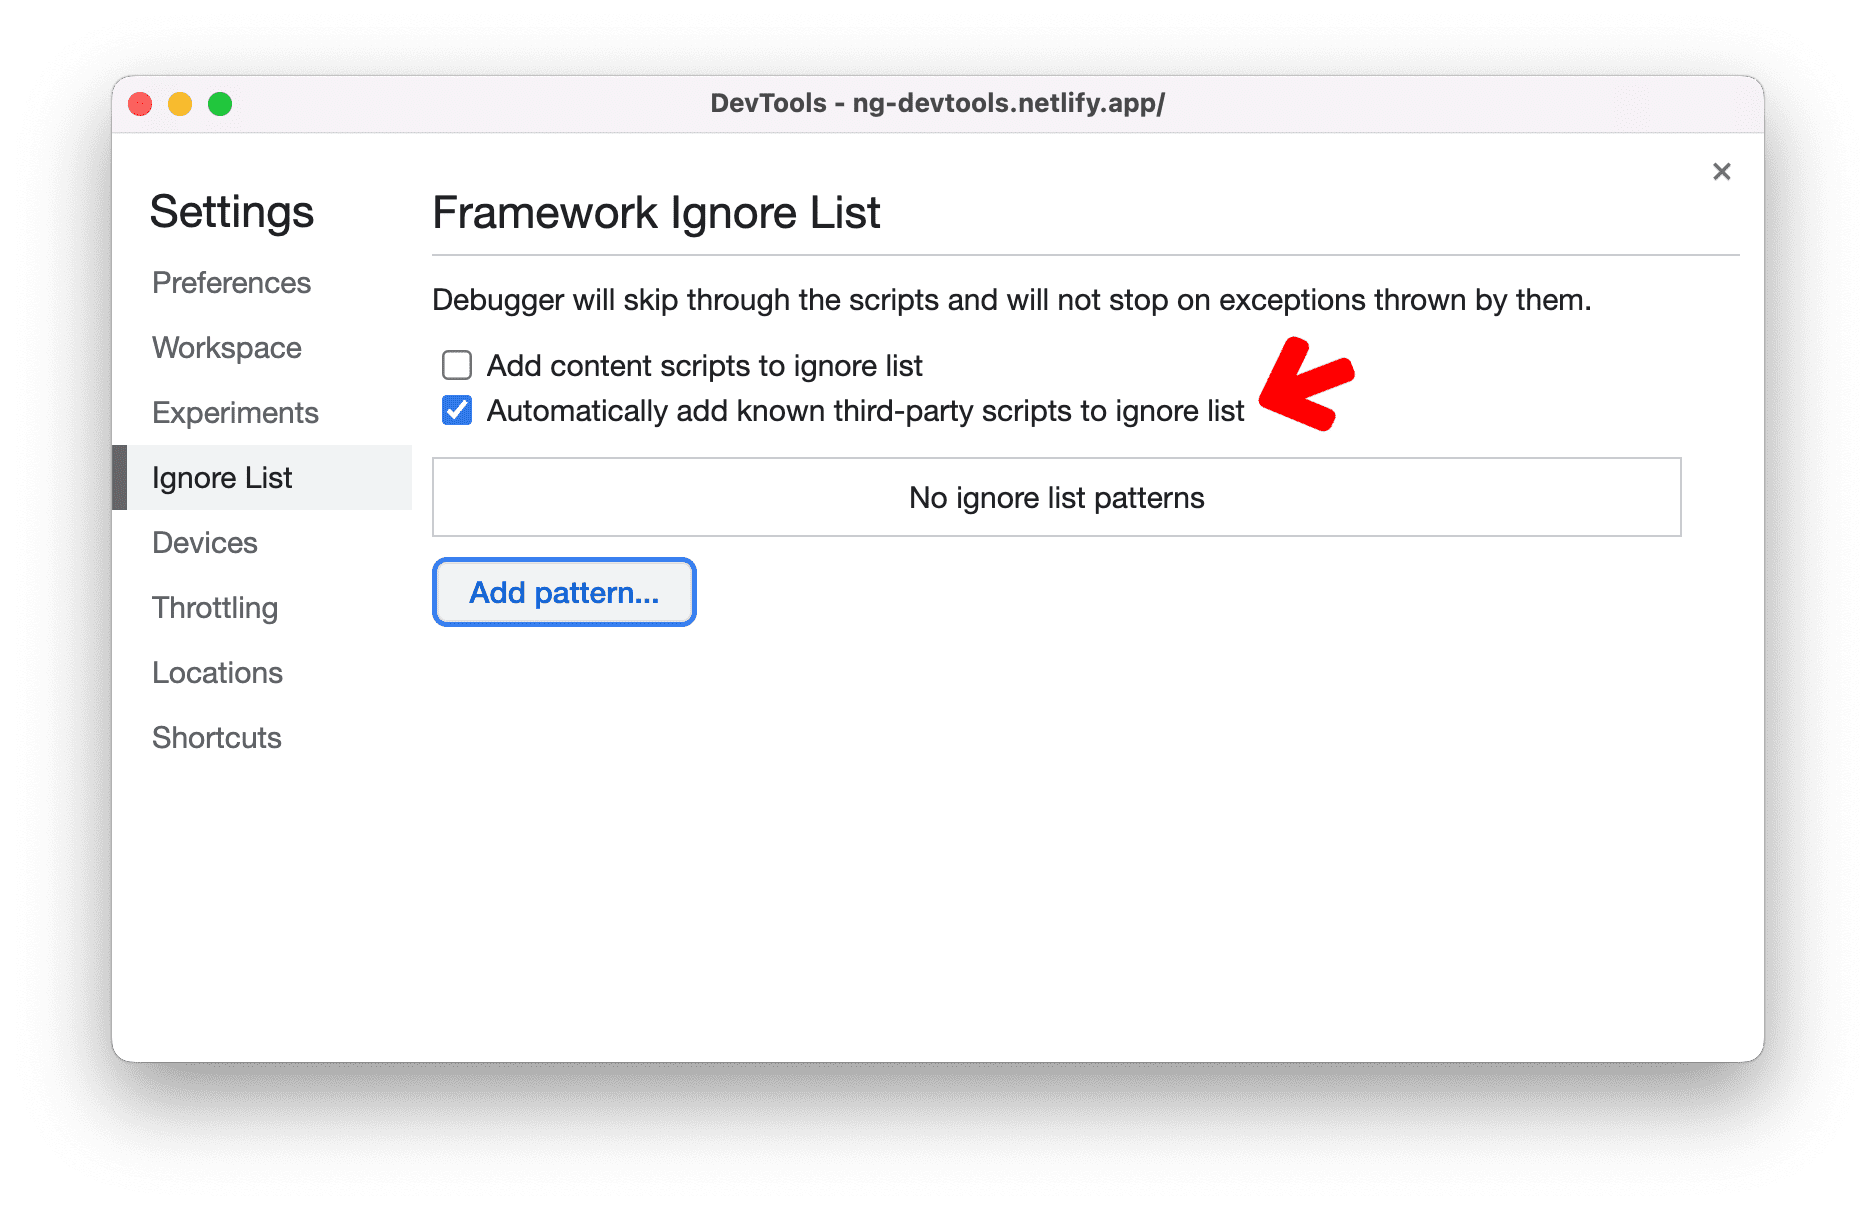 Setting to automatically add known third-party scripts to ignore list